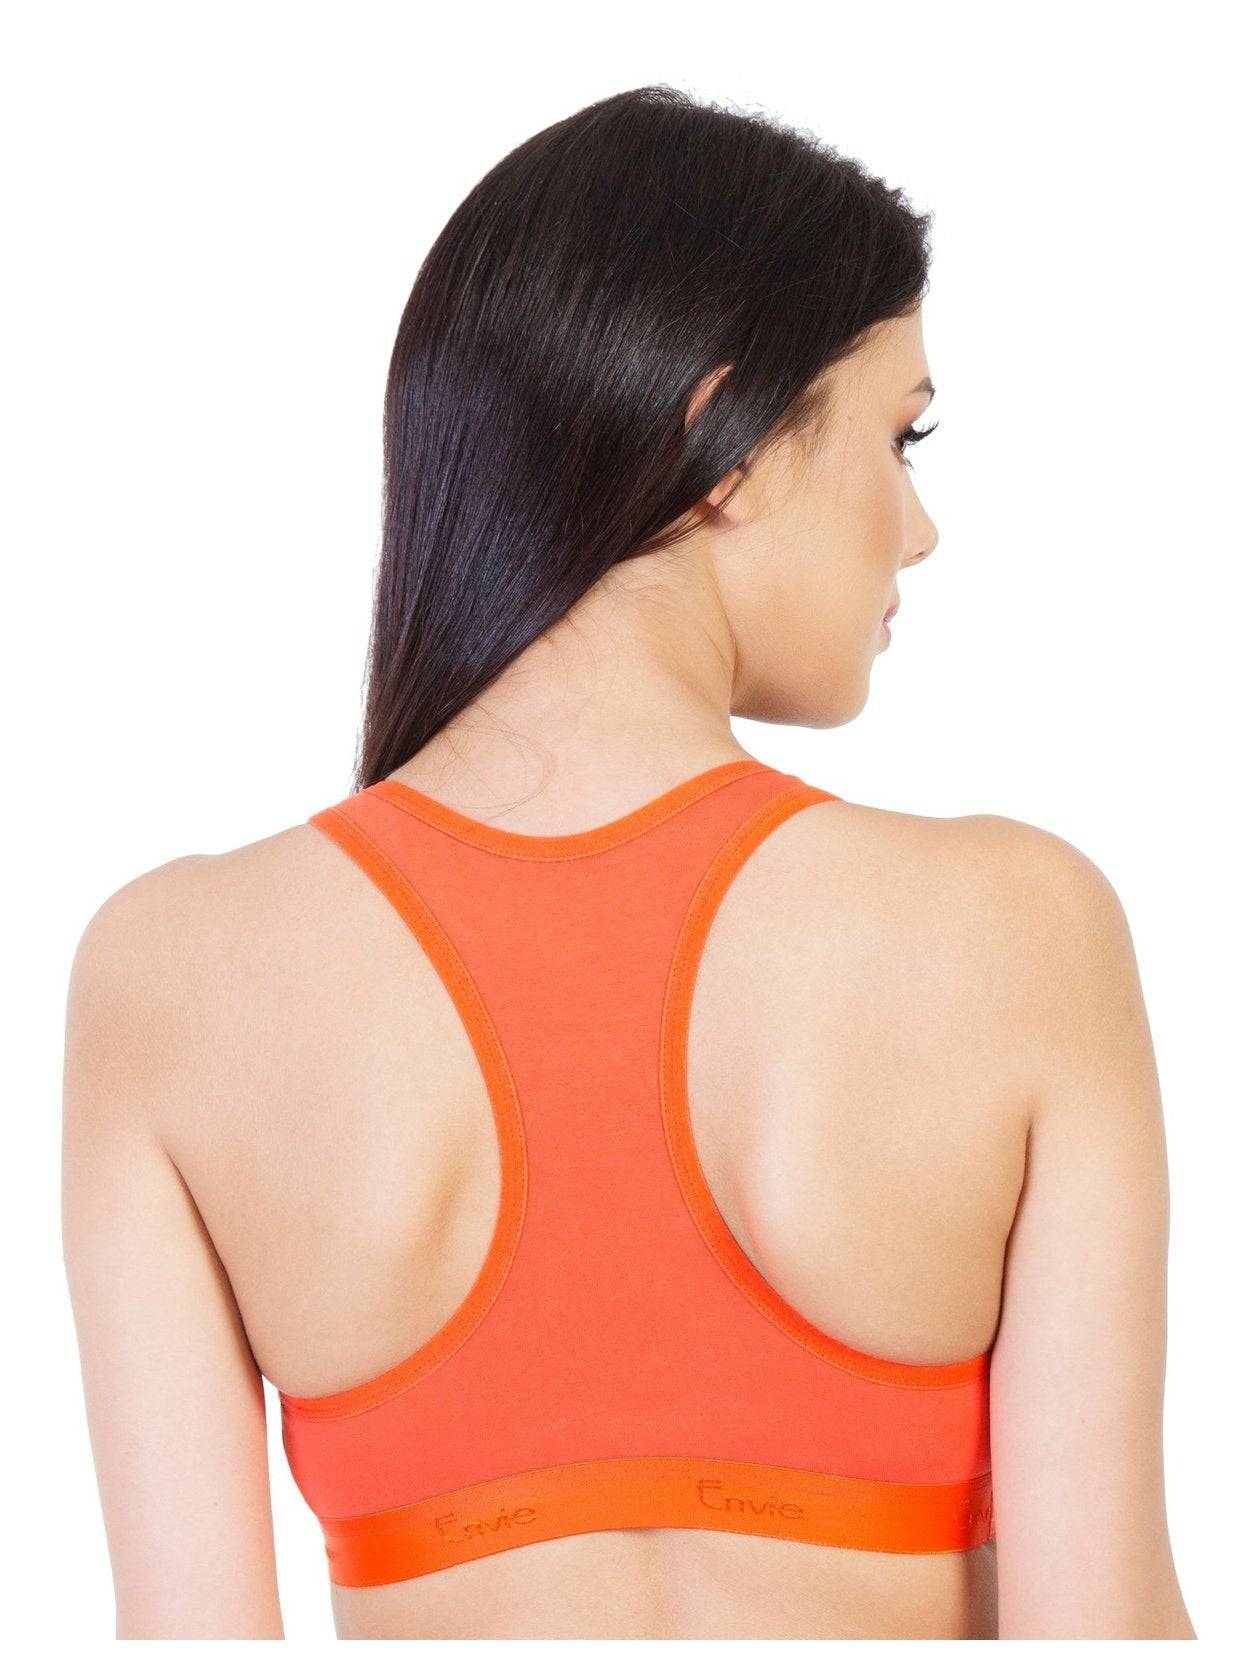 Envie Sports bra, Non Padded, Non Wired